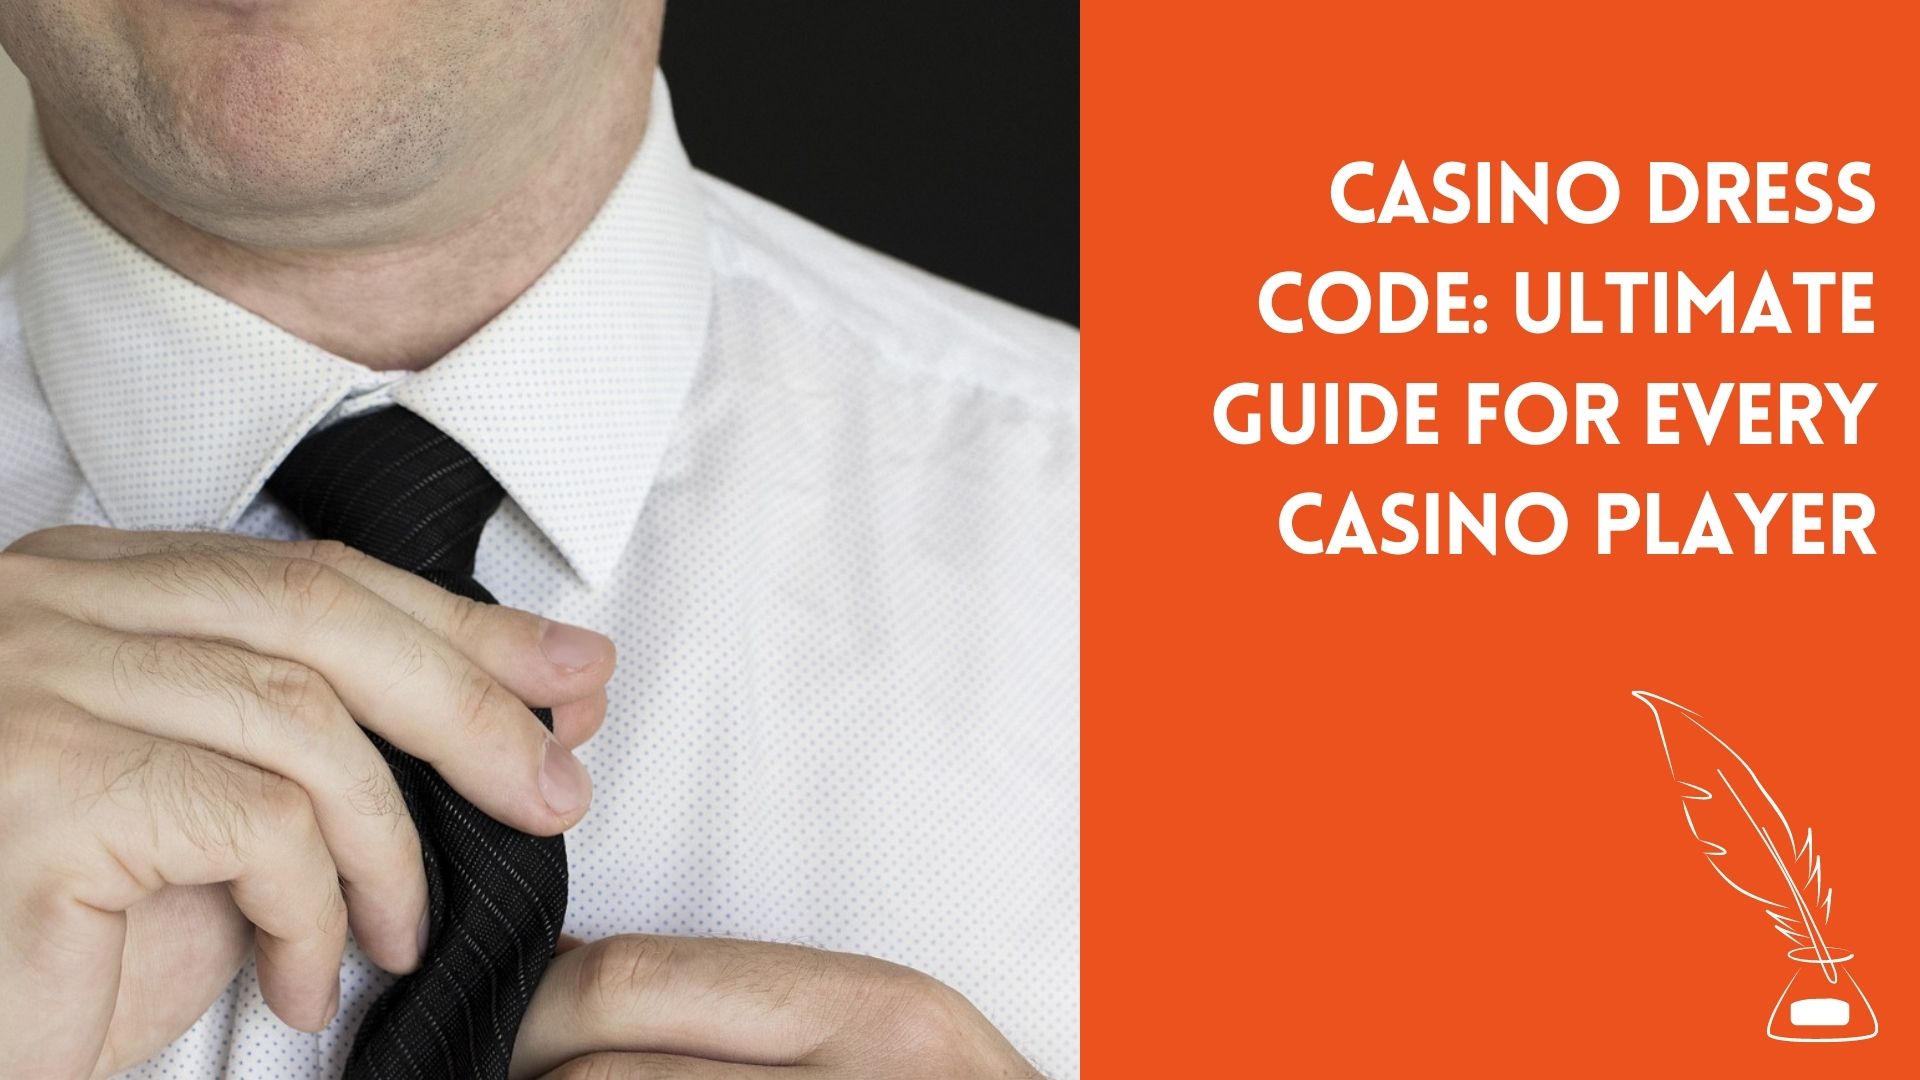 Casino Dress Code: Ultimate Guide for Every Casino Player